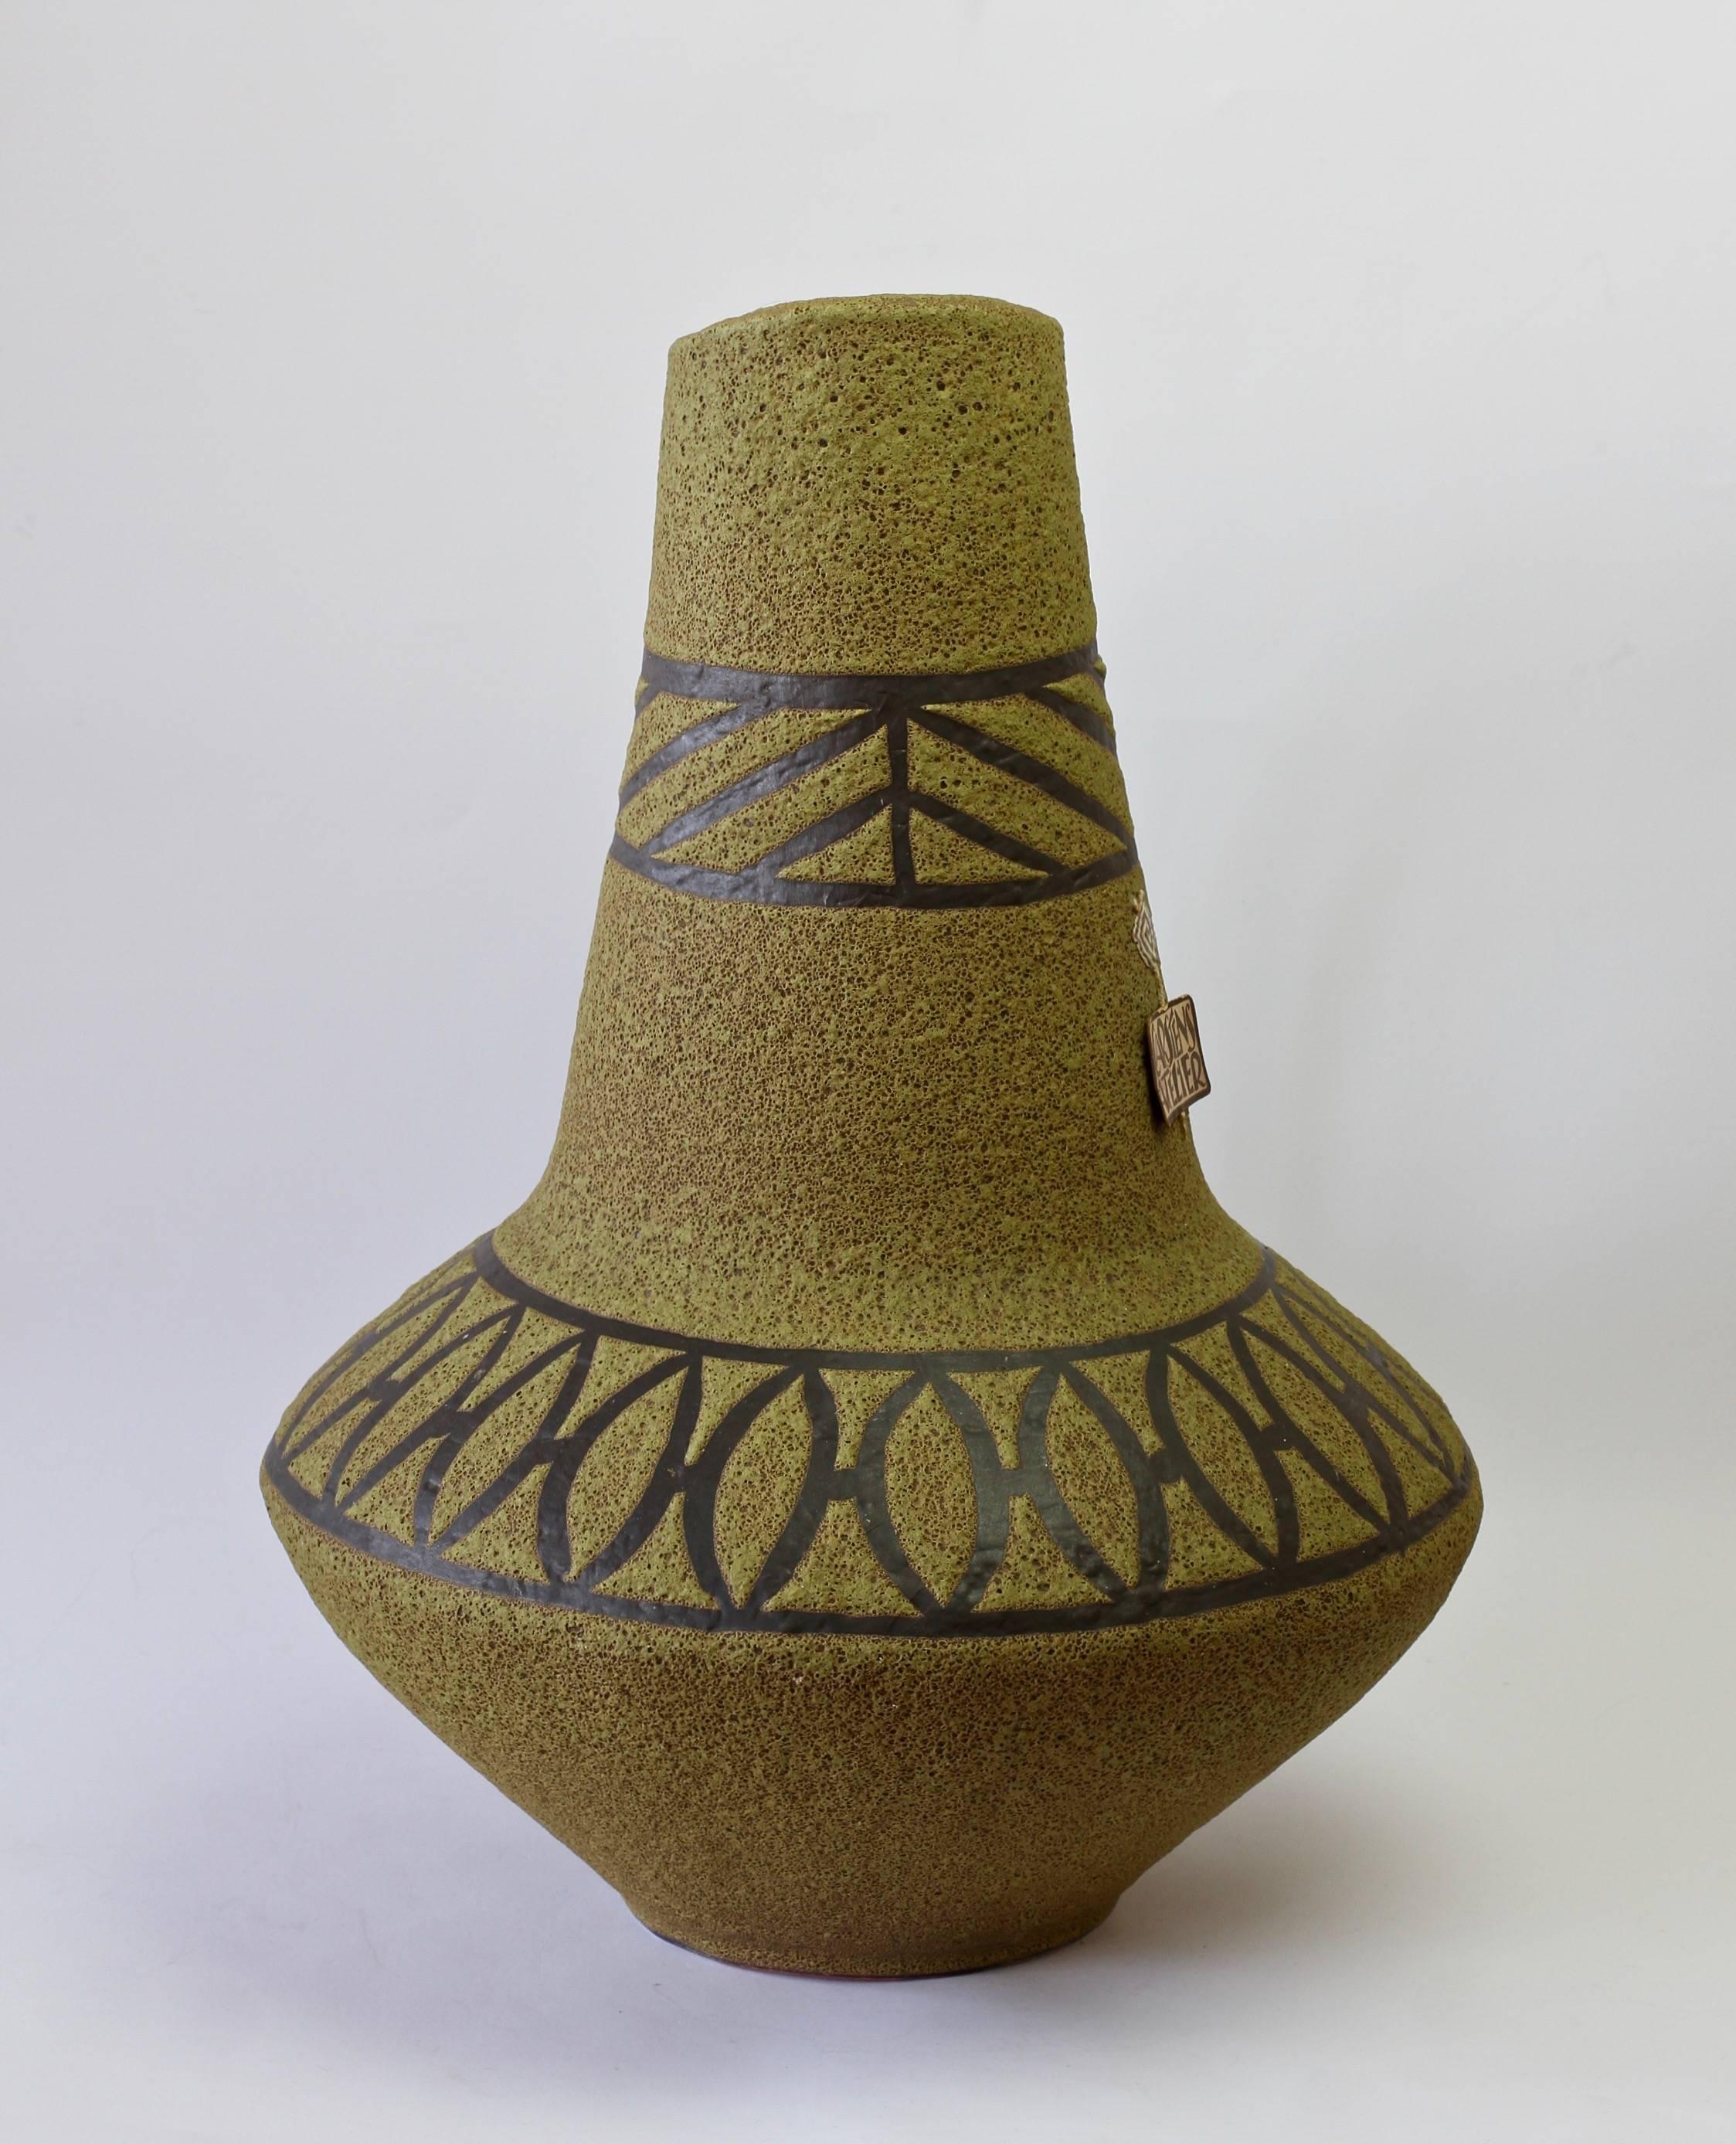 1970s Large Green Lava Glazed West German Pottery Floor Vase by Carstens Atelier For Sale 1